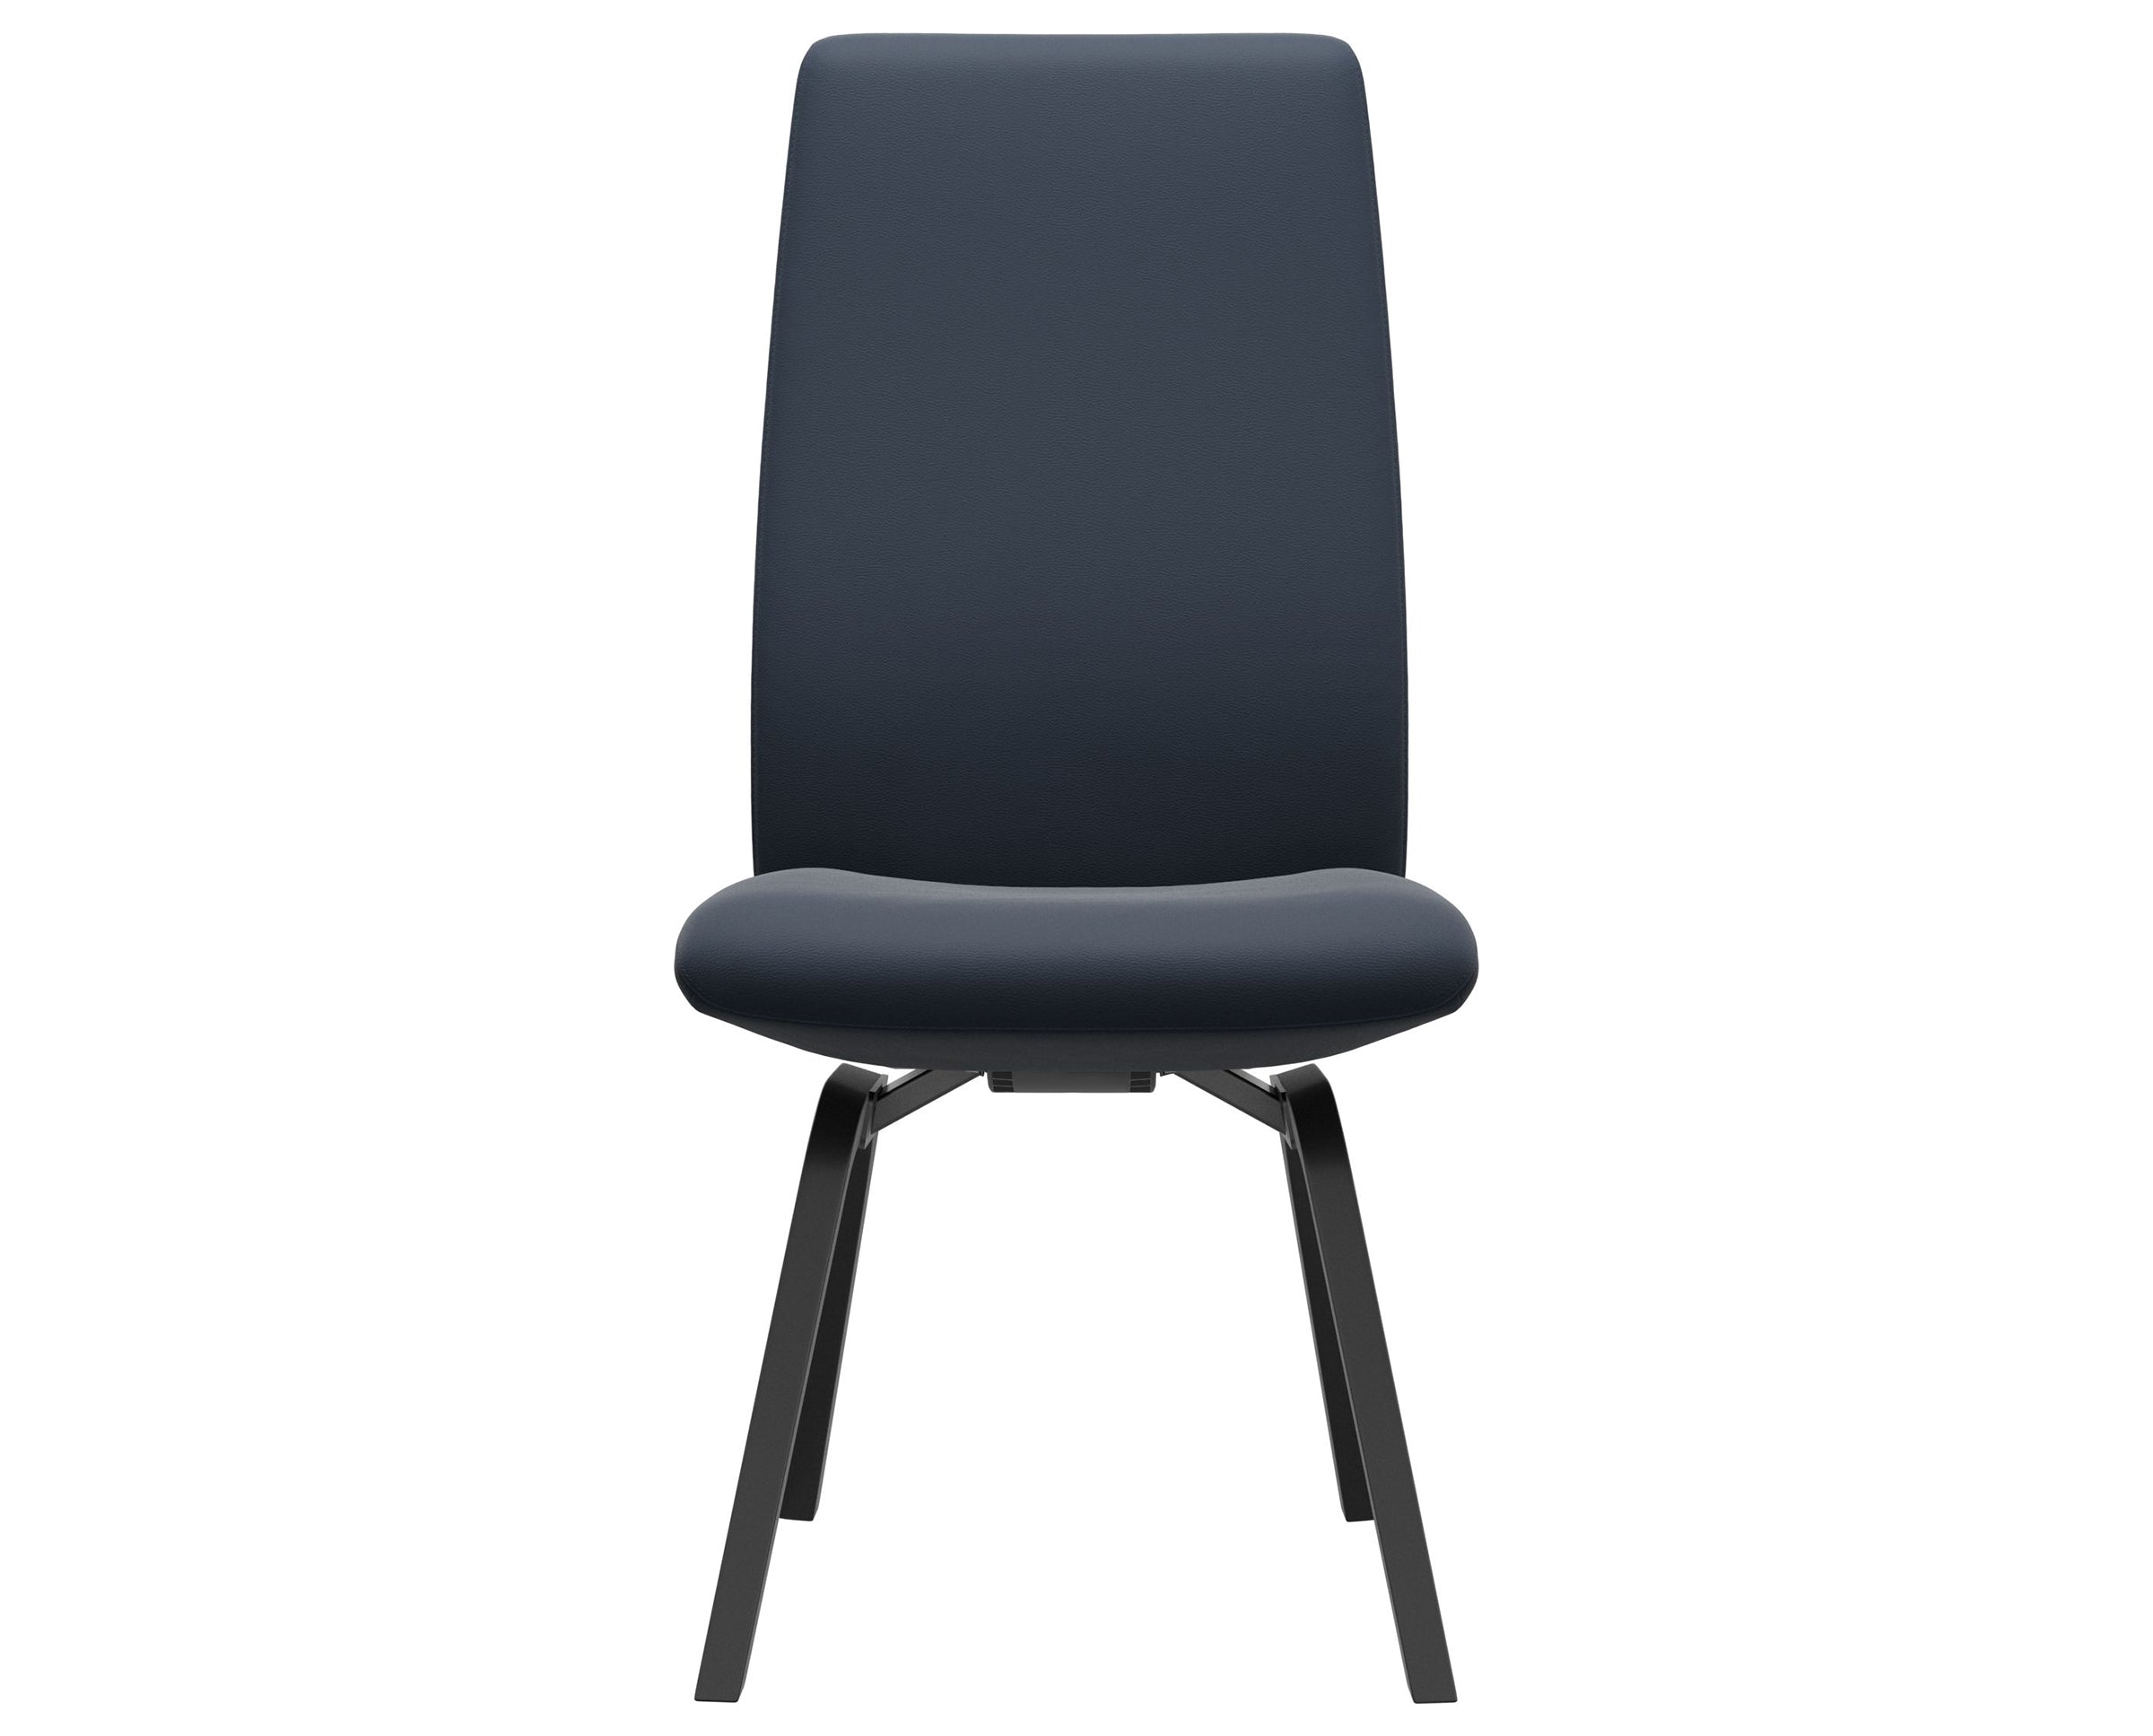 Paloma Leather Oxford Blue and Black Base | Stressless Laurel High Back D200 Dining Chair | Valley Ridge Furniture